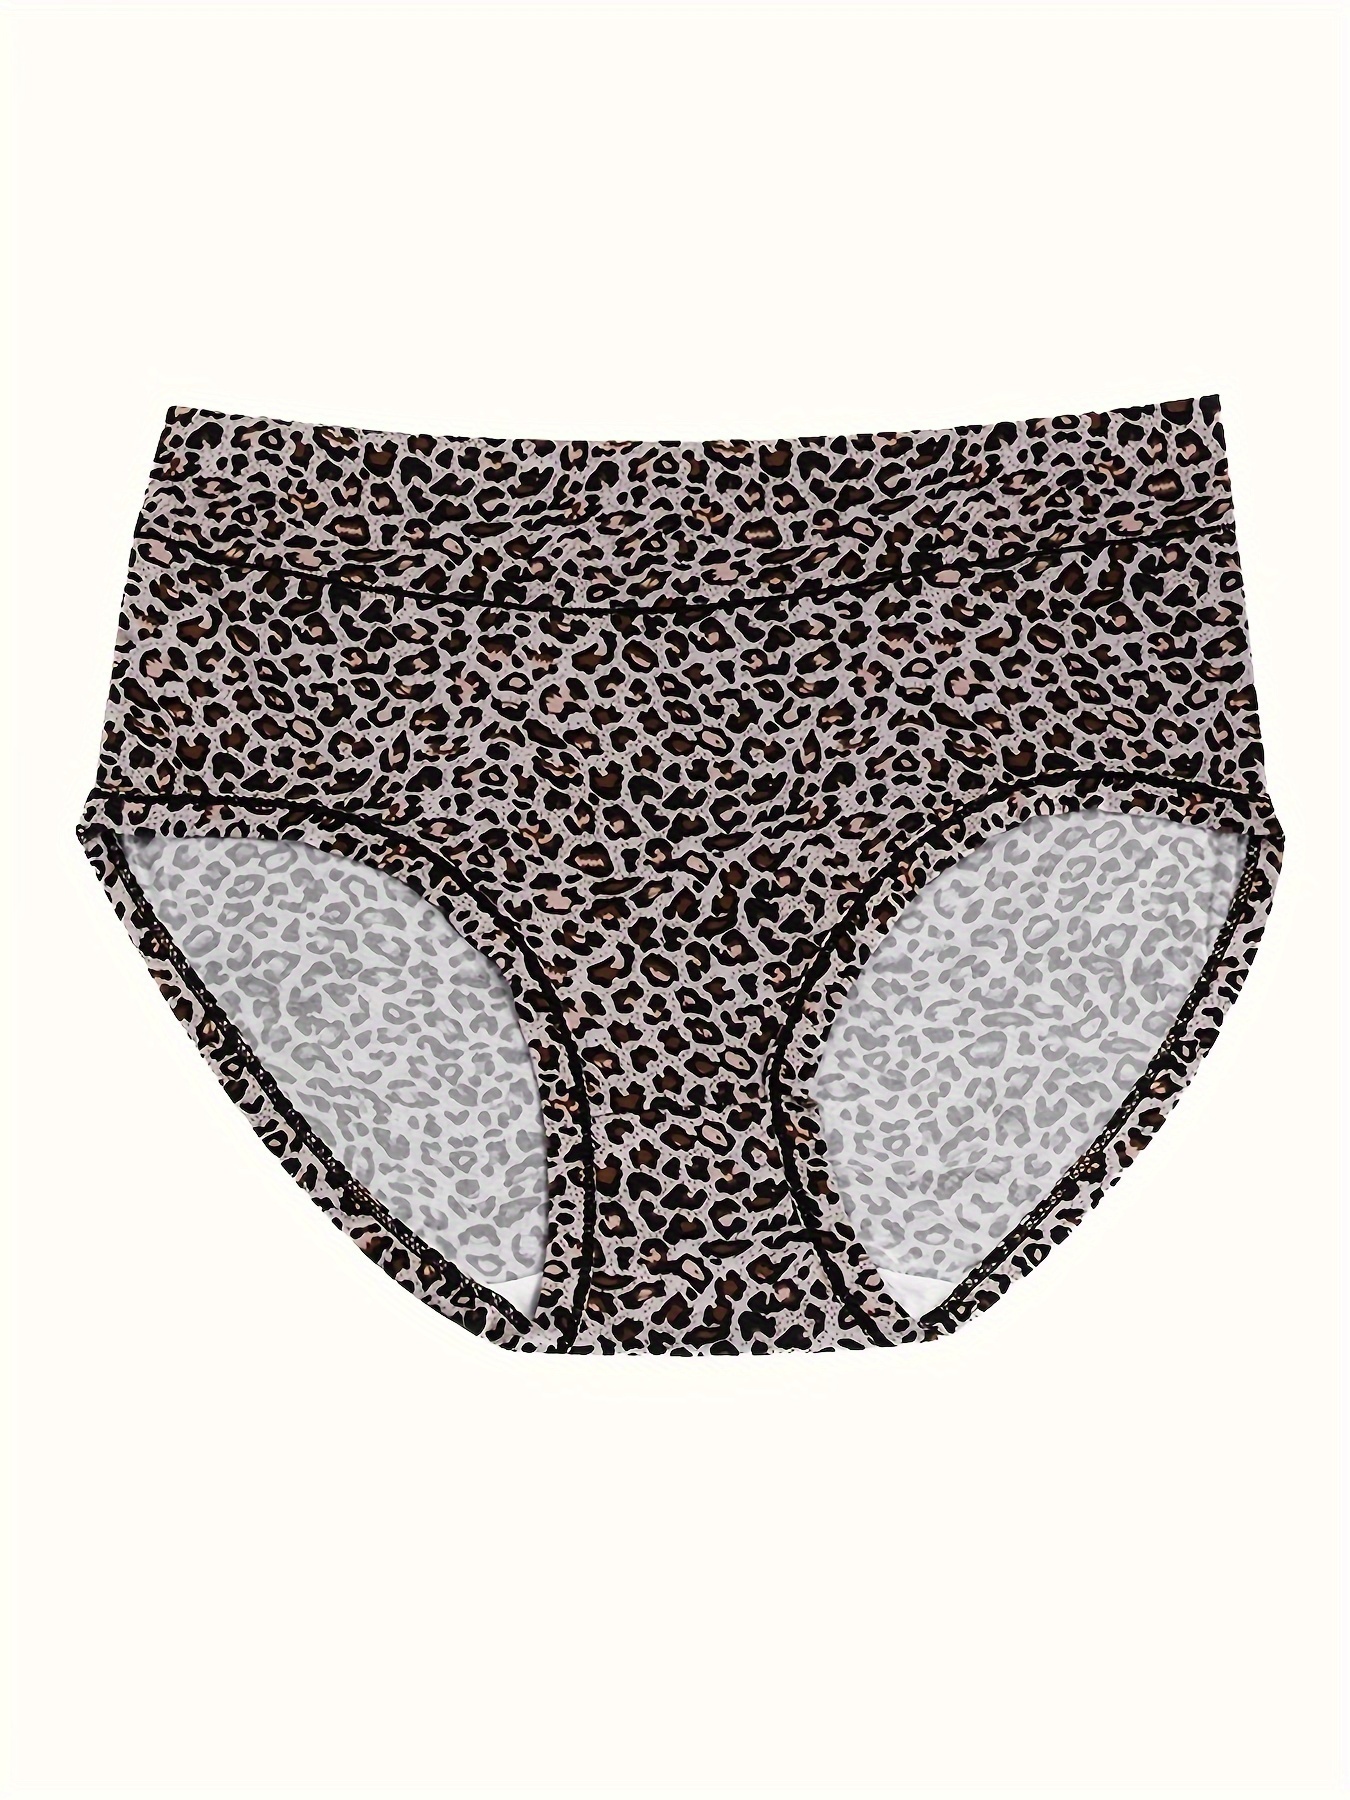 4 Pack of Women's Underwear of Leopard Print, with Medium Size